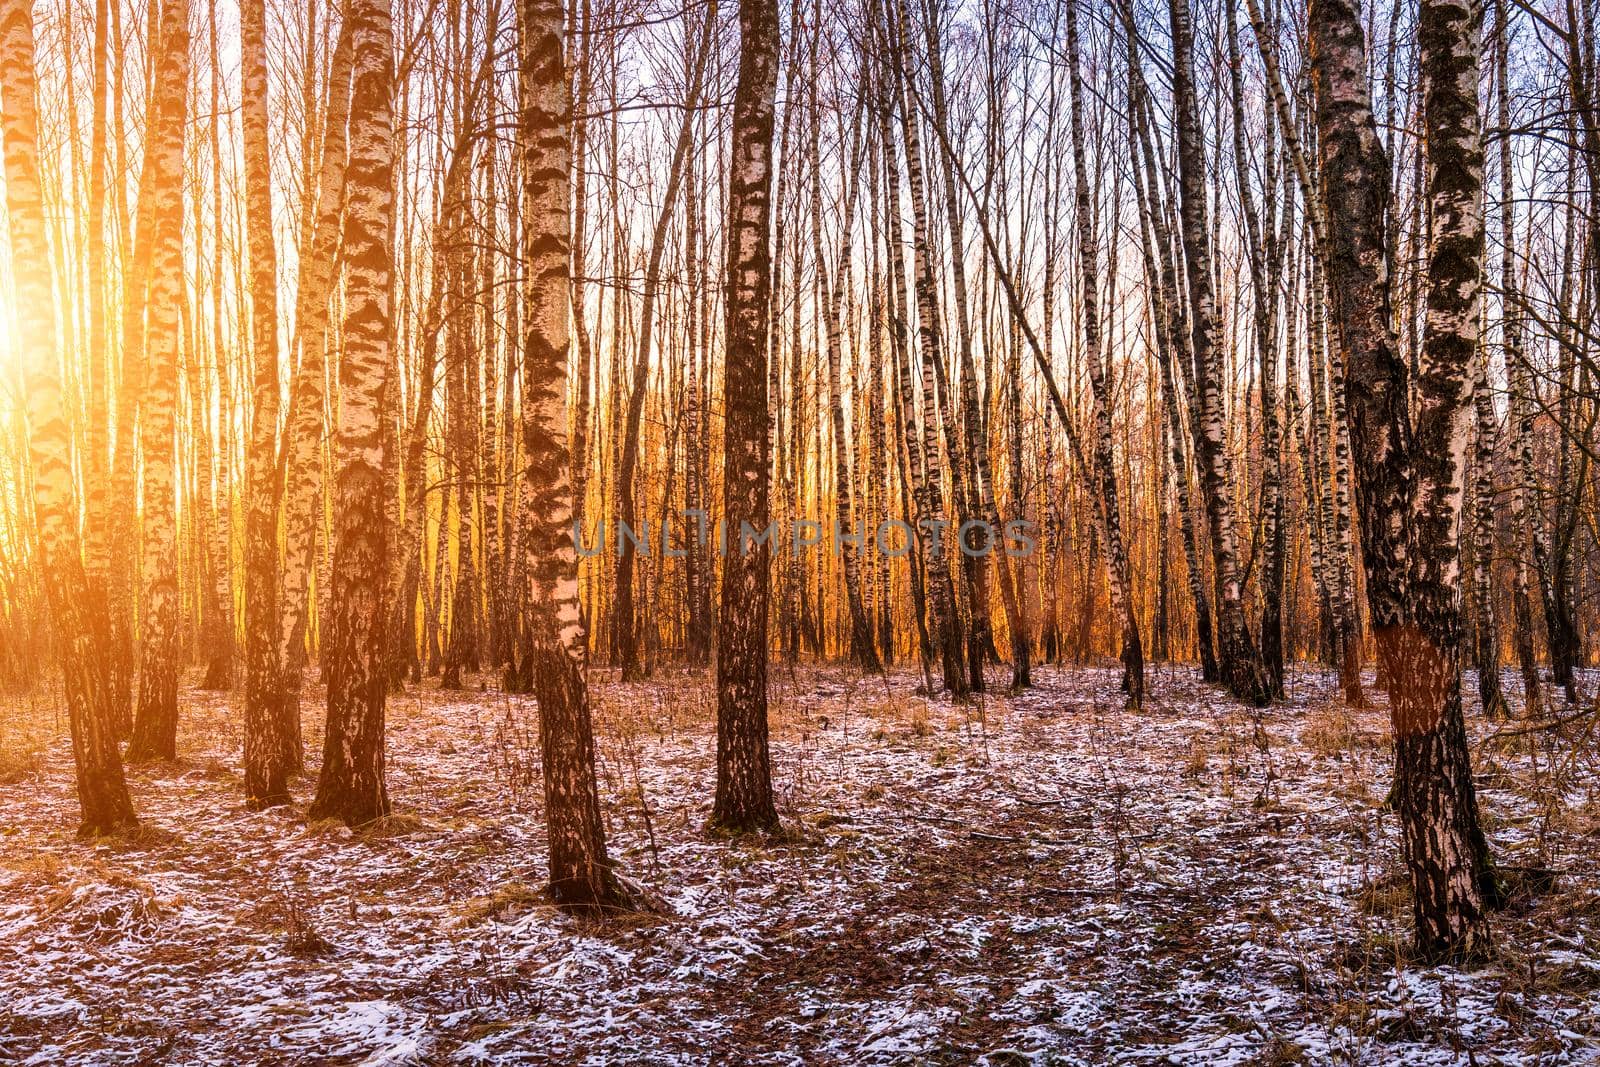 Sunset or sunrise in a birch grove with a first winter snow. Rows of birch trunks with the sun's rays. by Eugene_Yemelyanov